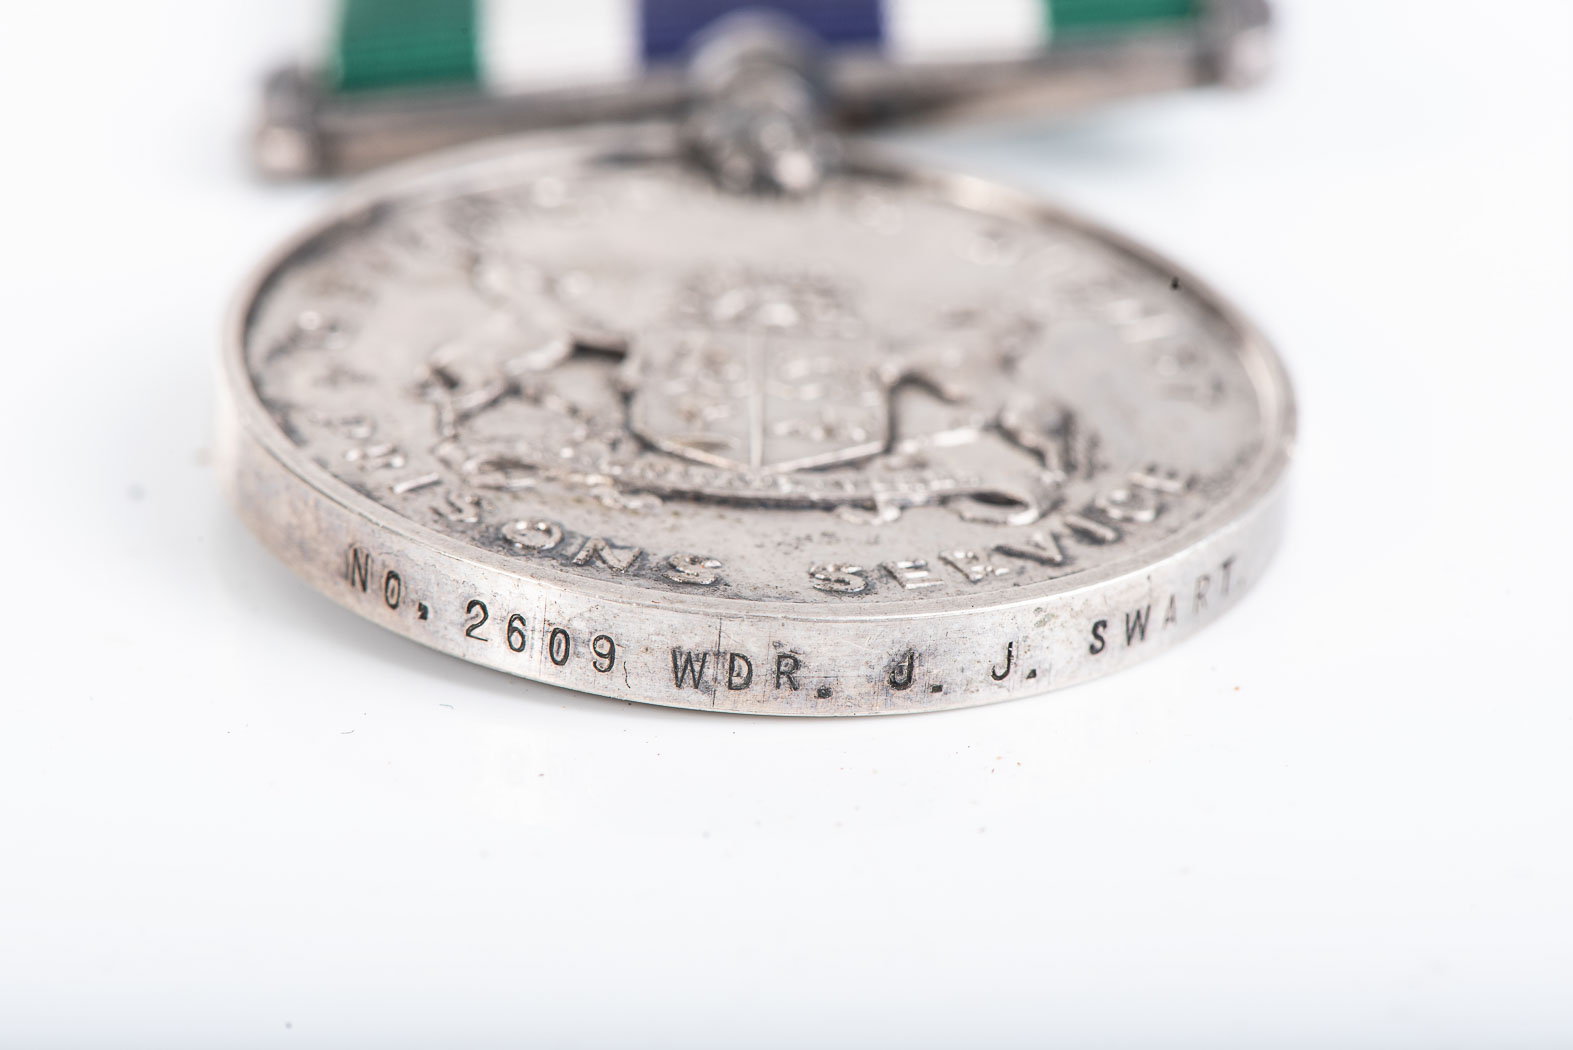 SOUTH AFRICAN FAITHFUL SERVICE PRISON MEDAL No. 2609 Warden J.J. SWART. Instituted 1965. Full size - Image 3 of 3